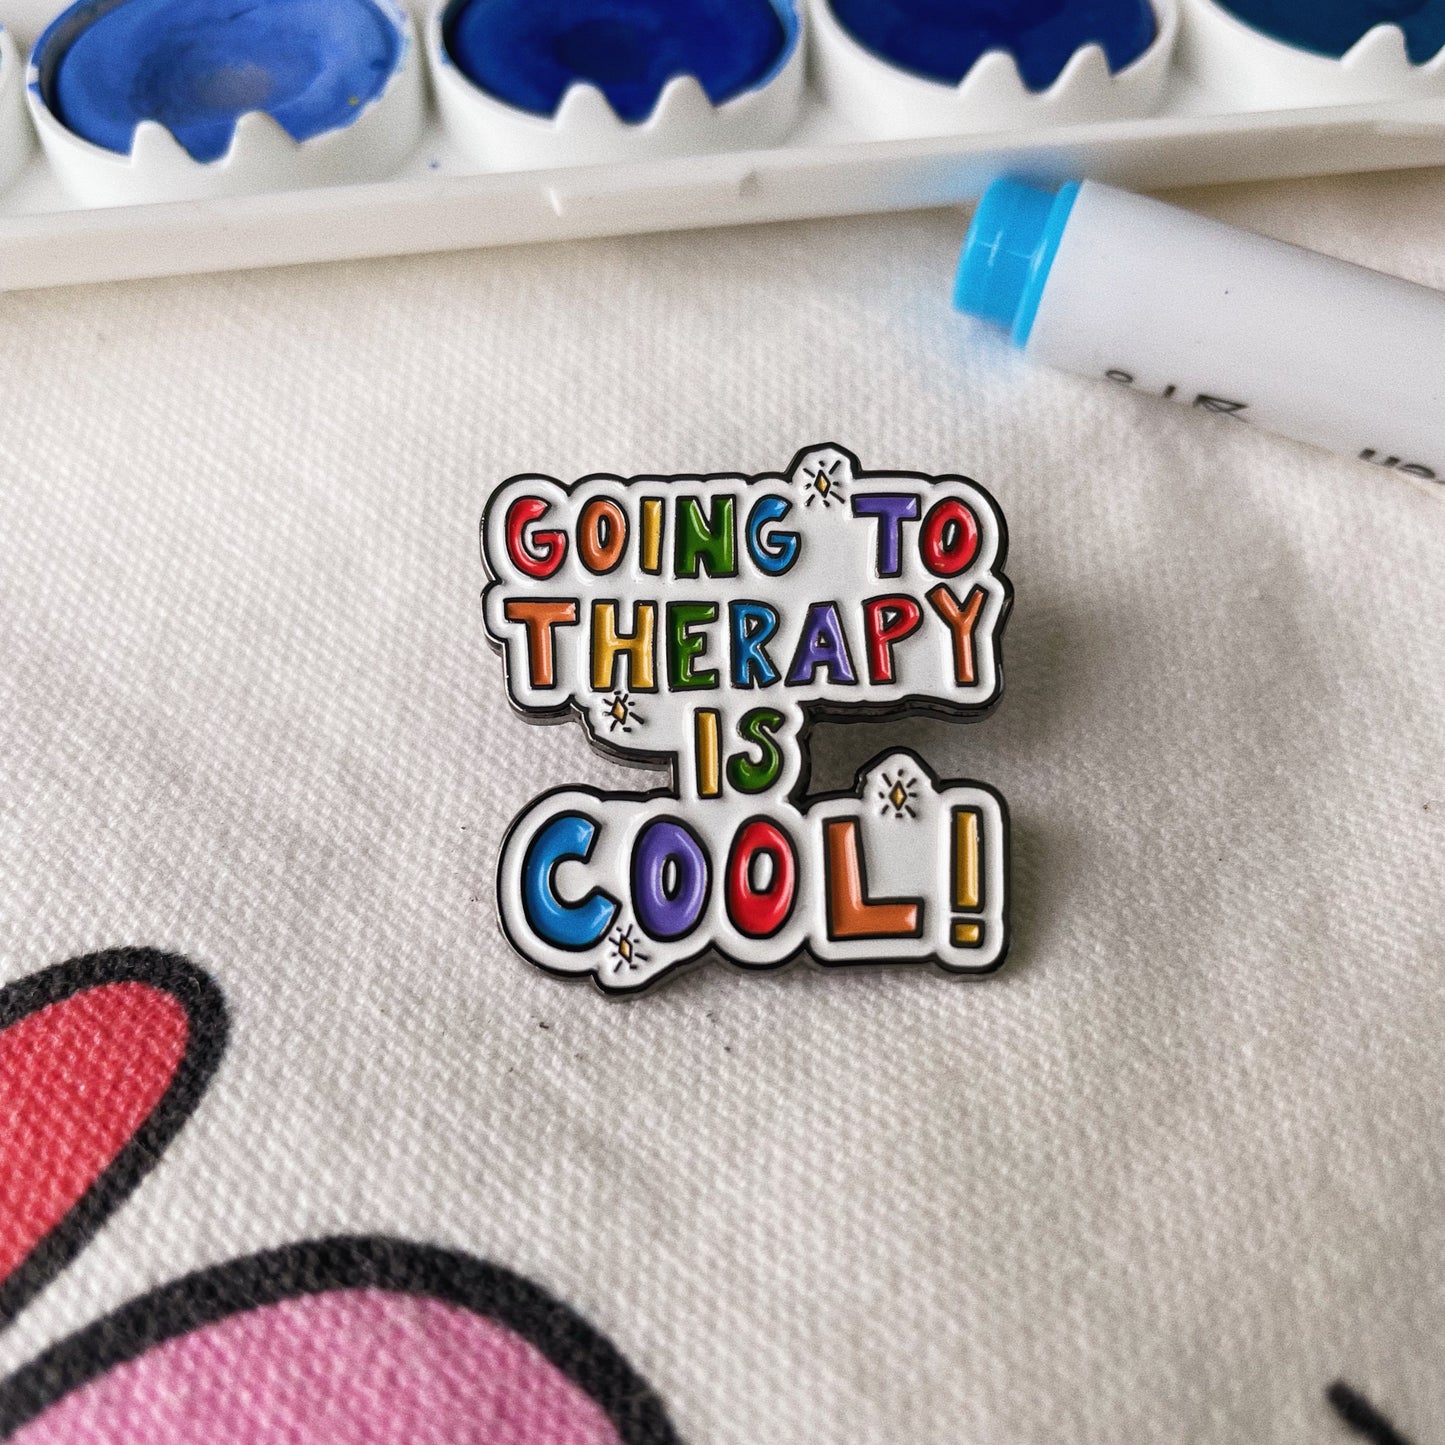 Going To Therapy Is Cool! - Enamel Pin